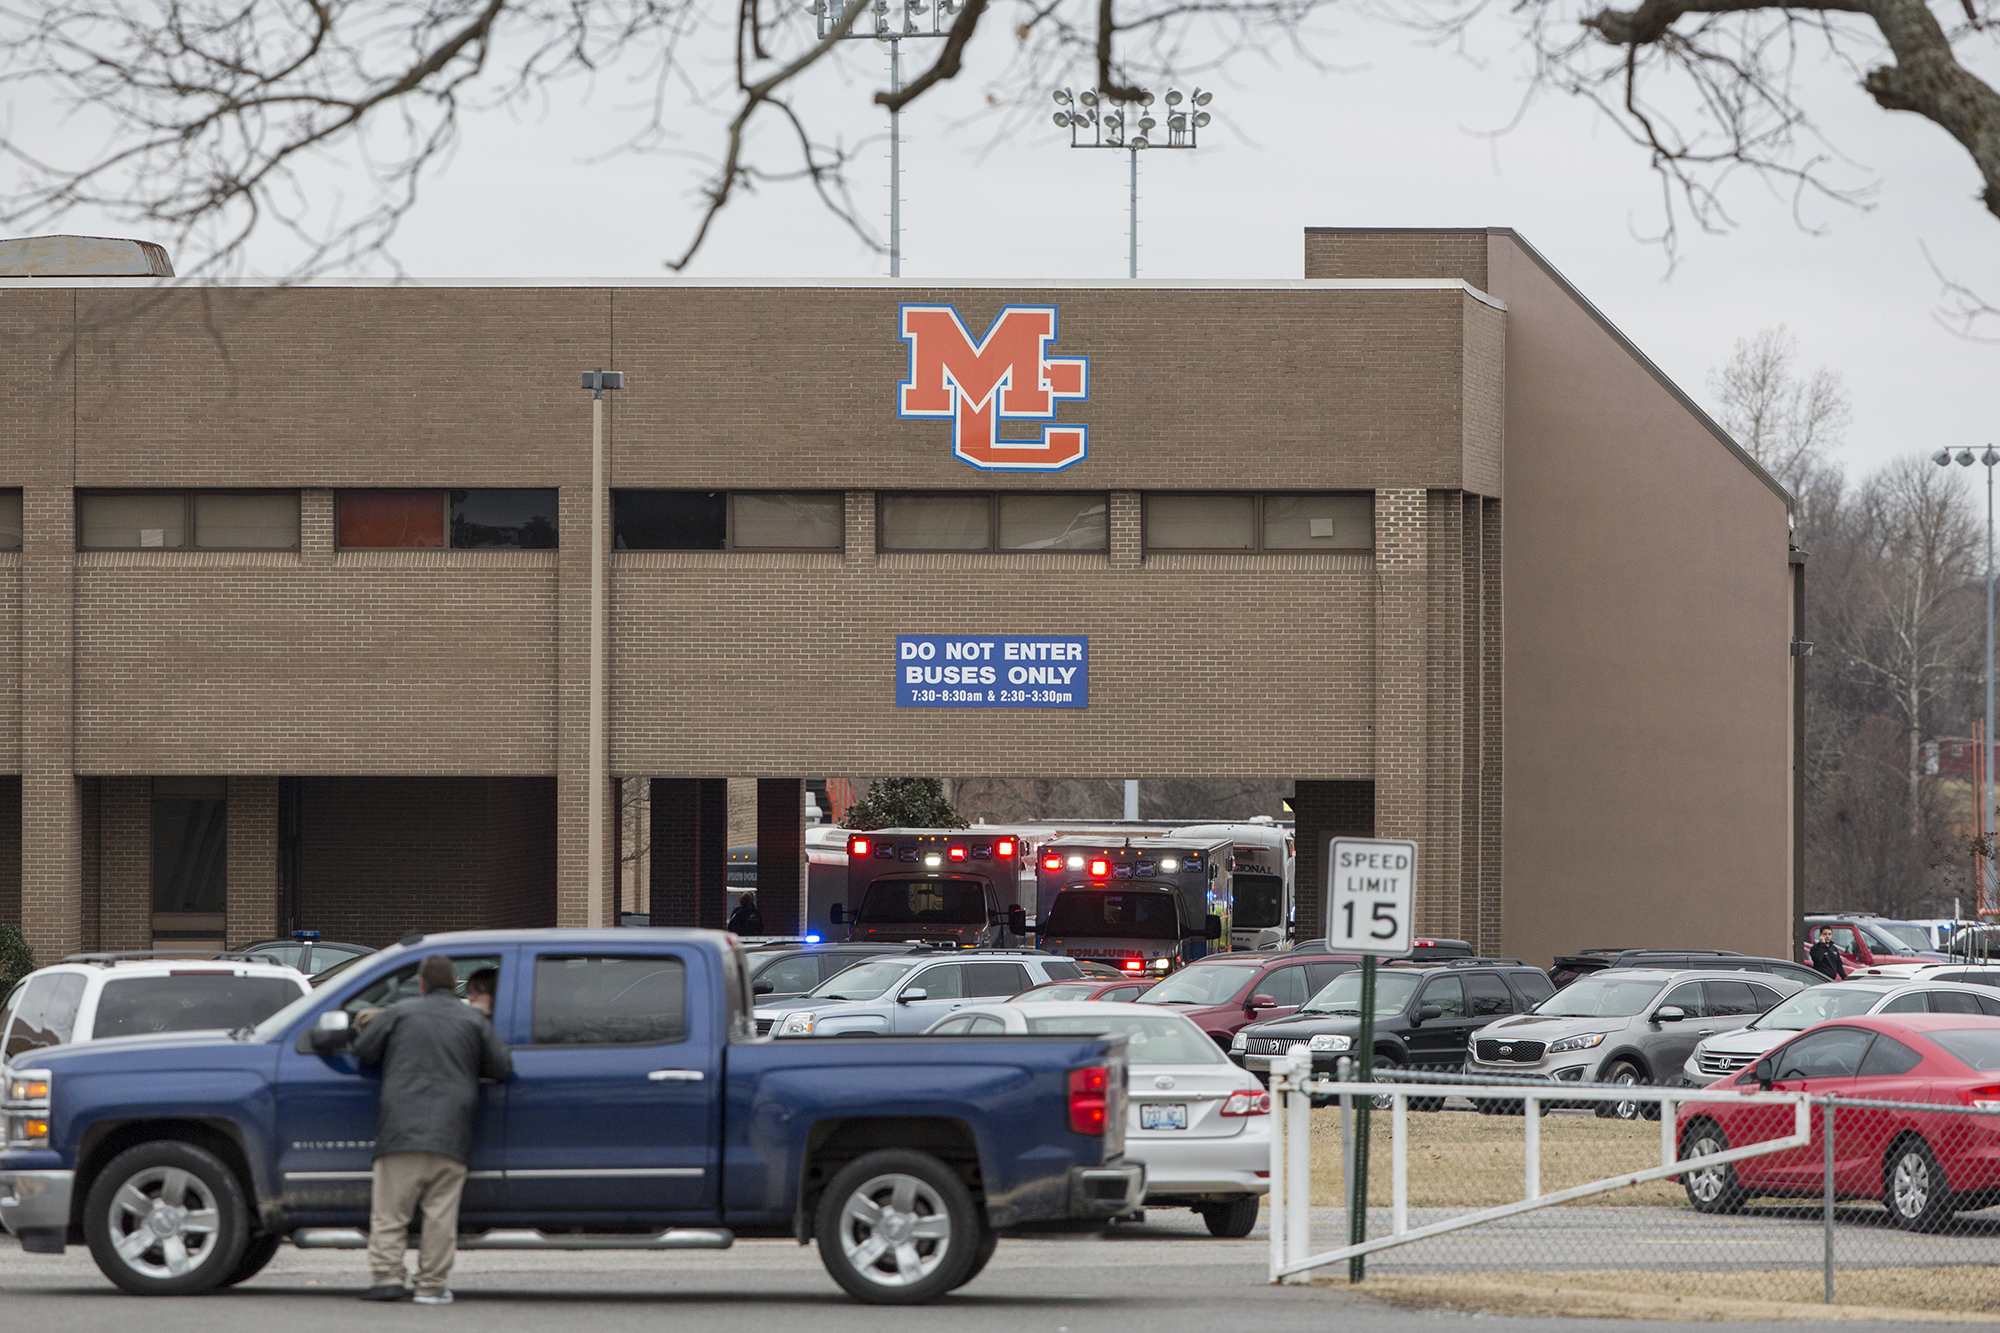 PHOTO: Emergency crews in Benton, Ky. respond to Marshall County High School after a fatal school shooting, Jan. 23, 2018.